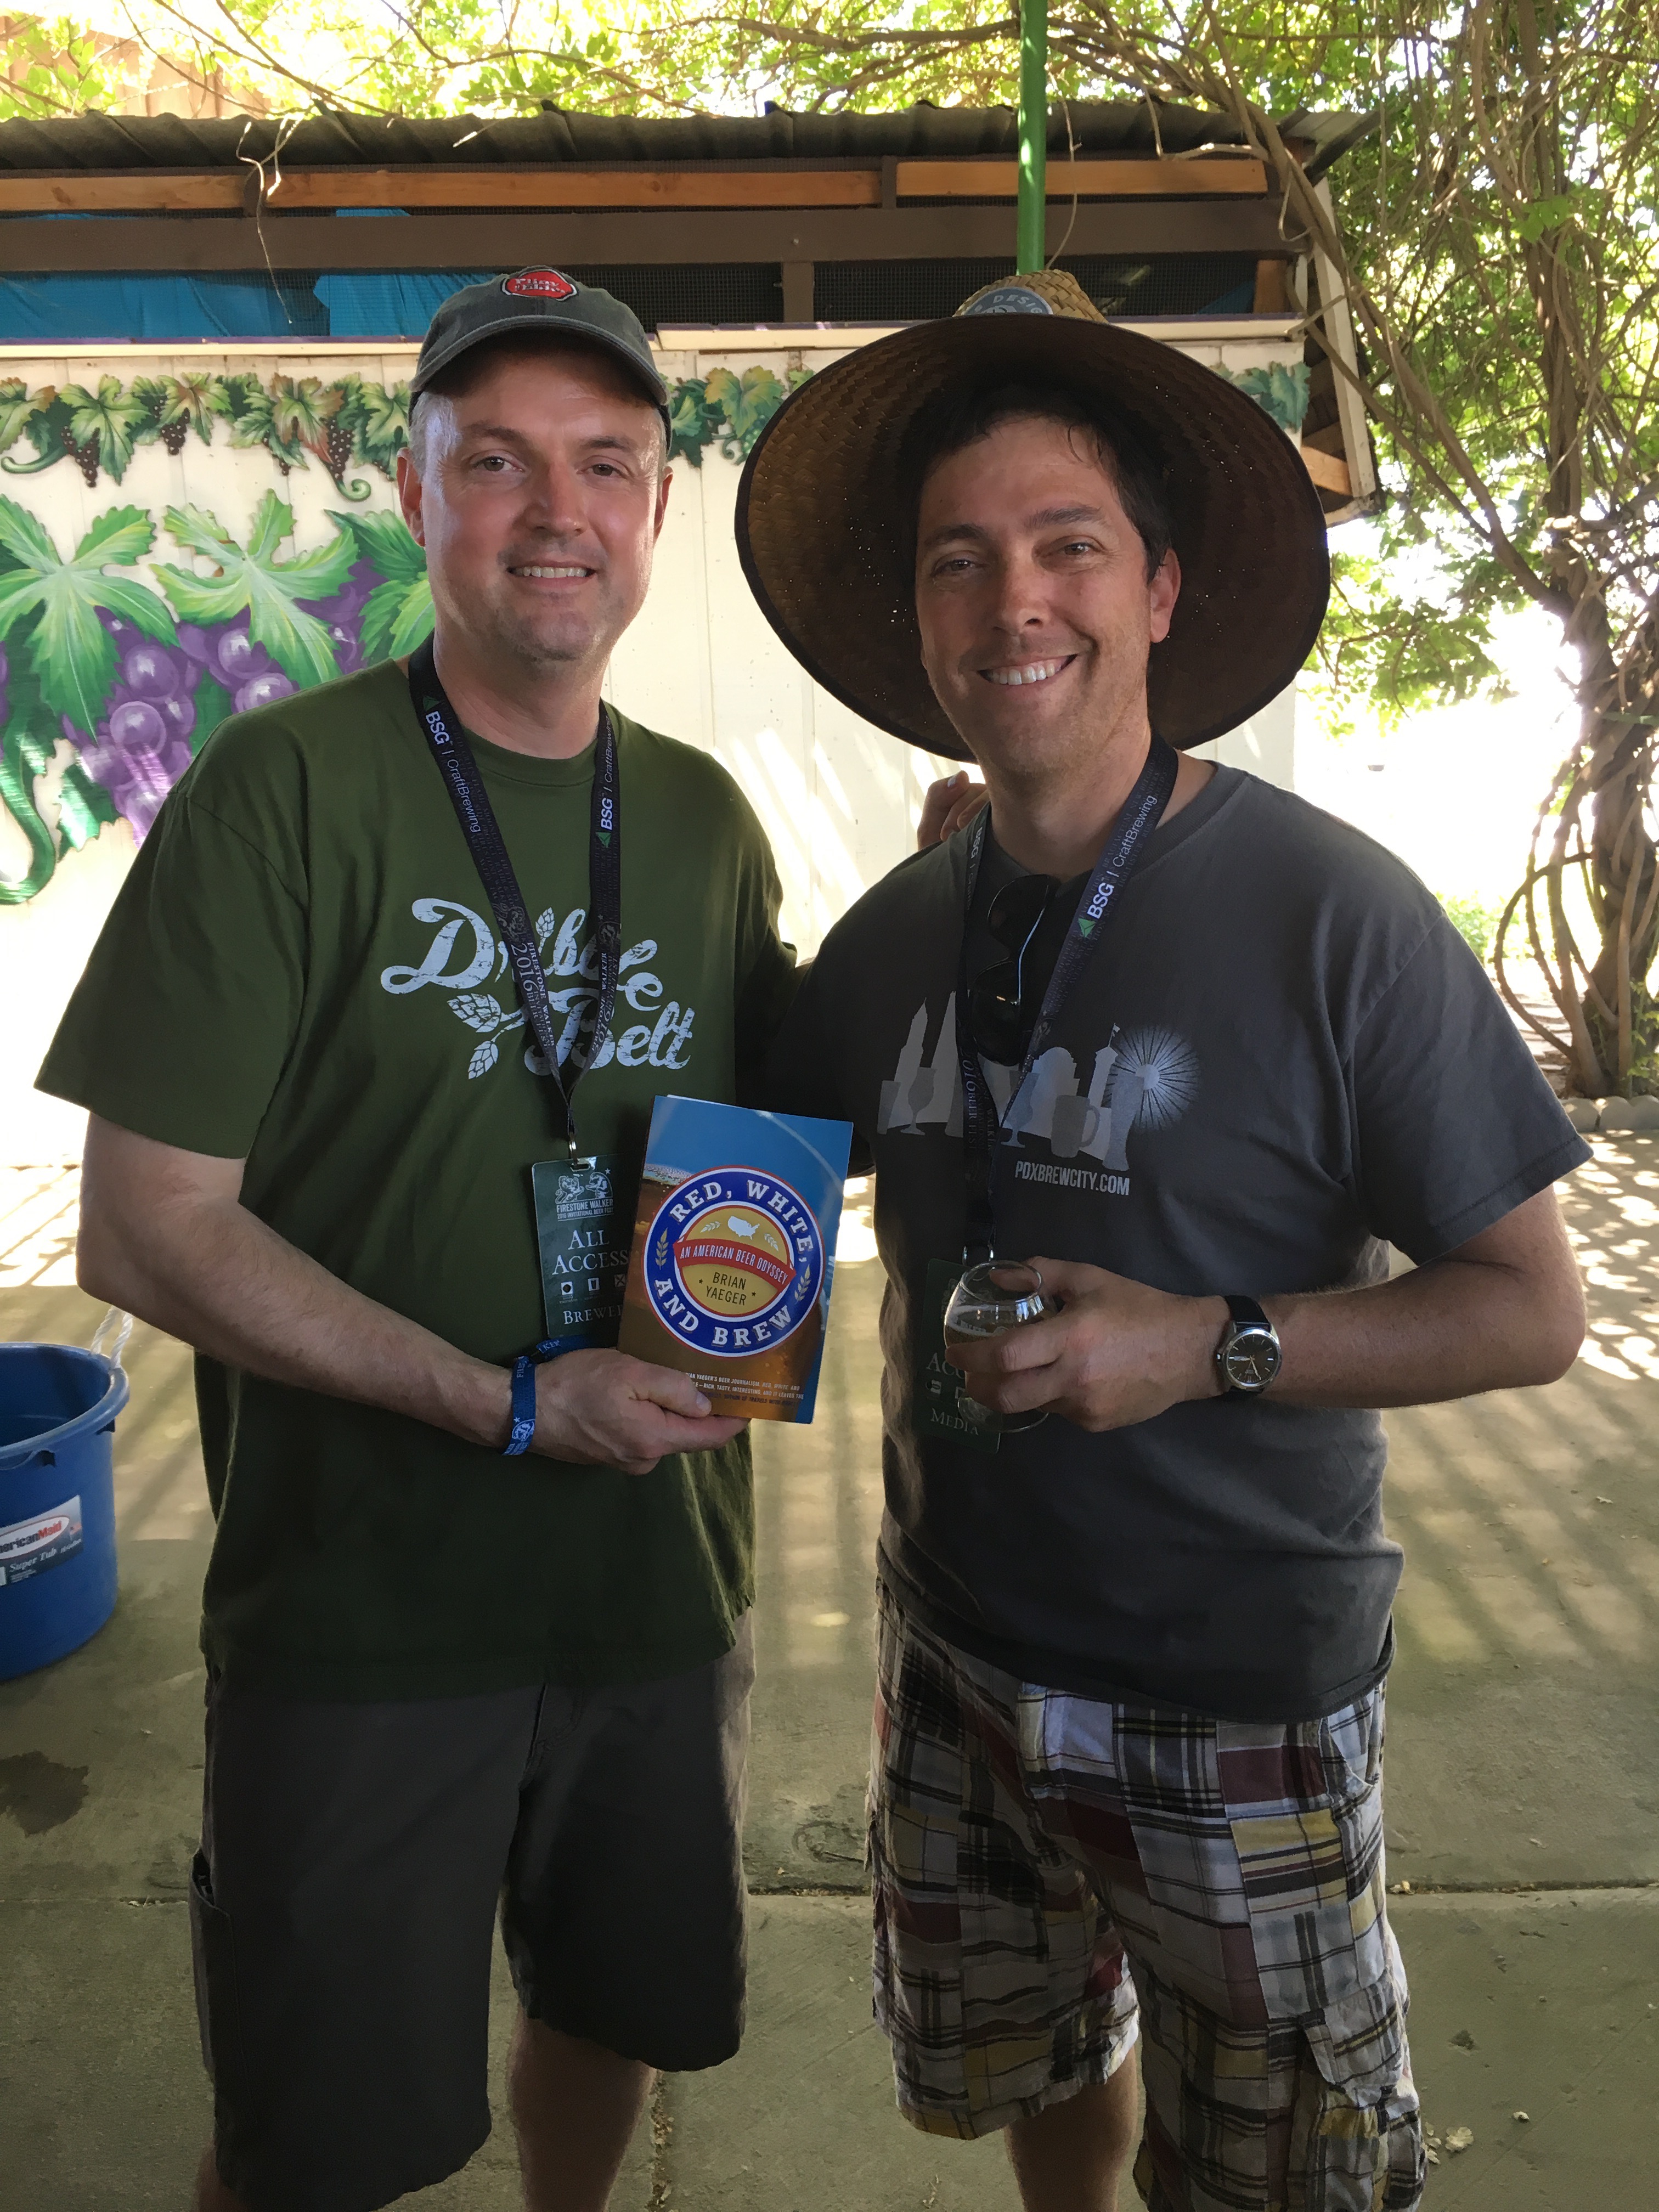 Brian Yaeger (left) giving Vinnie Cilurzo, founder of Russian River Brewing, his book Red, White, And Brew at the 2016 Firestone Walker Invitational Beer Fest.